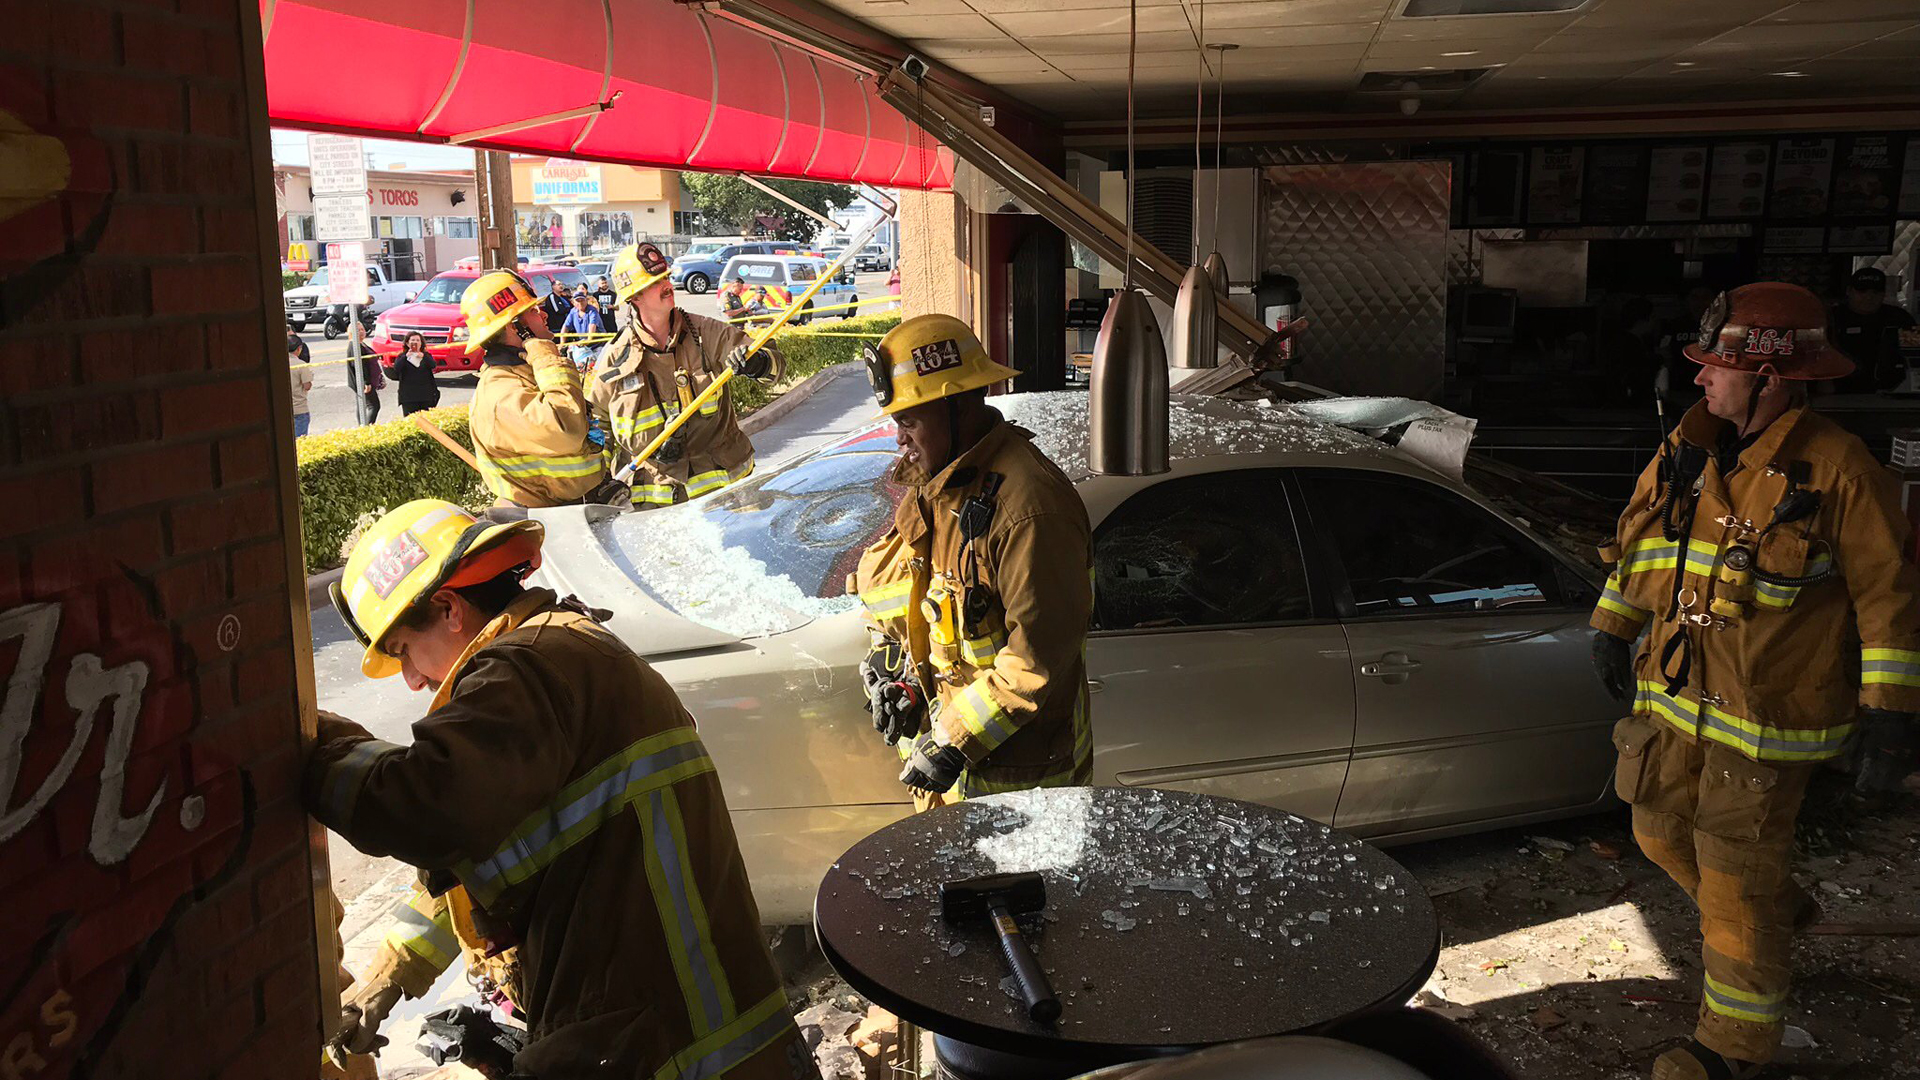 A car is seen after slamming into a Carl's Jr. in Huntington Park following a crash on April 1, 2019, in an image tweeted by the Los Angeles County Fire Department.